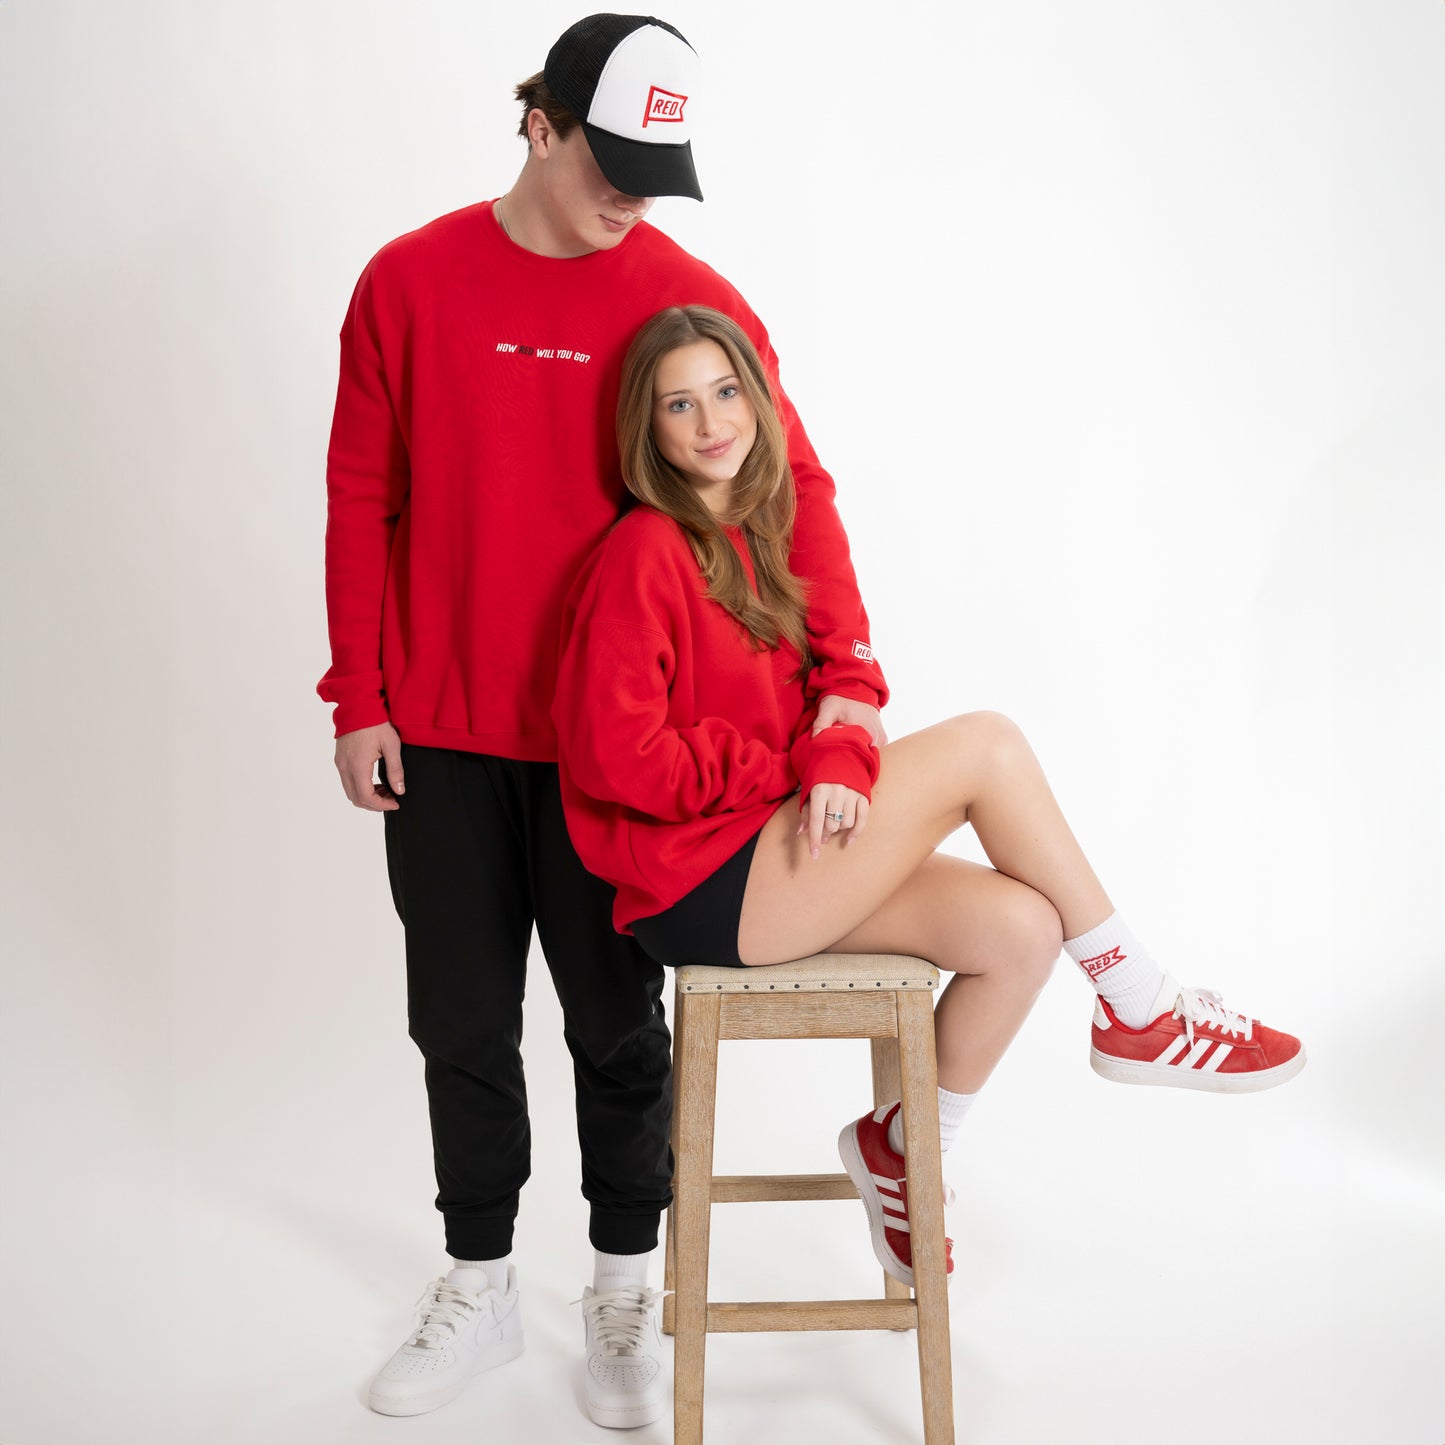 HOW RED WILL YOU GO CREWNECK (RED)